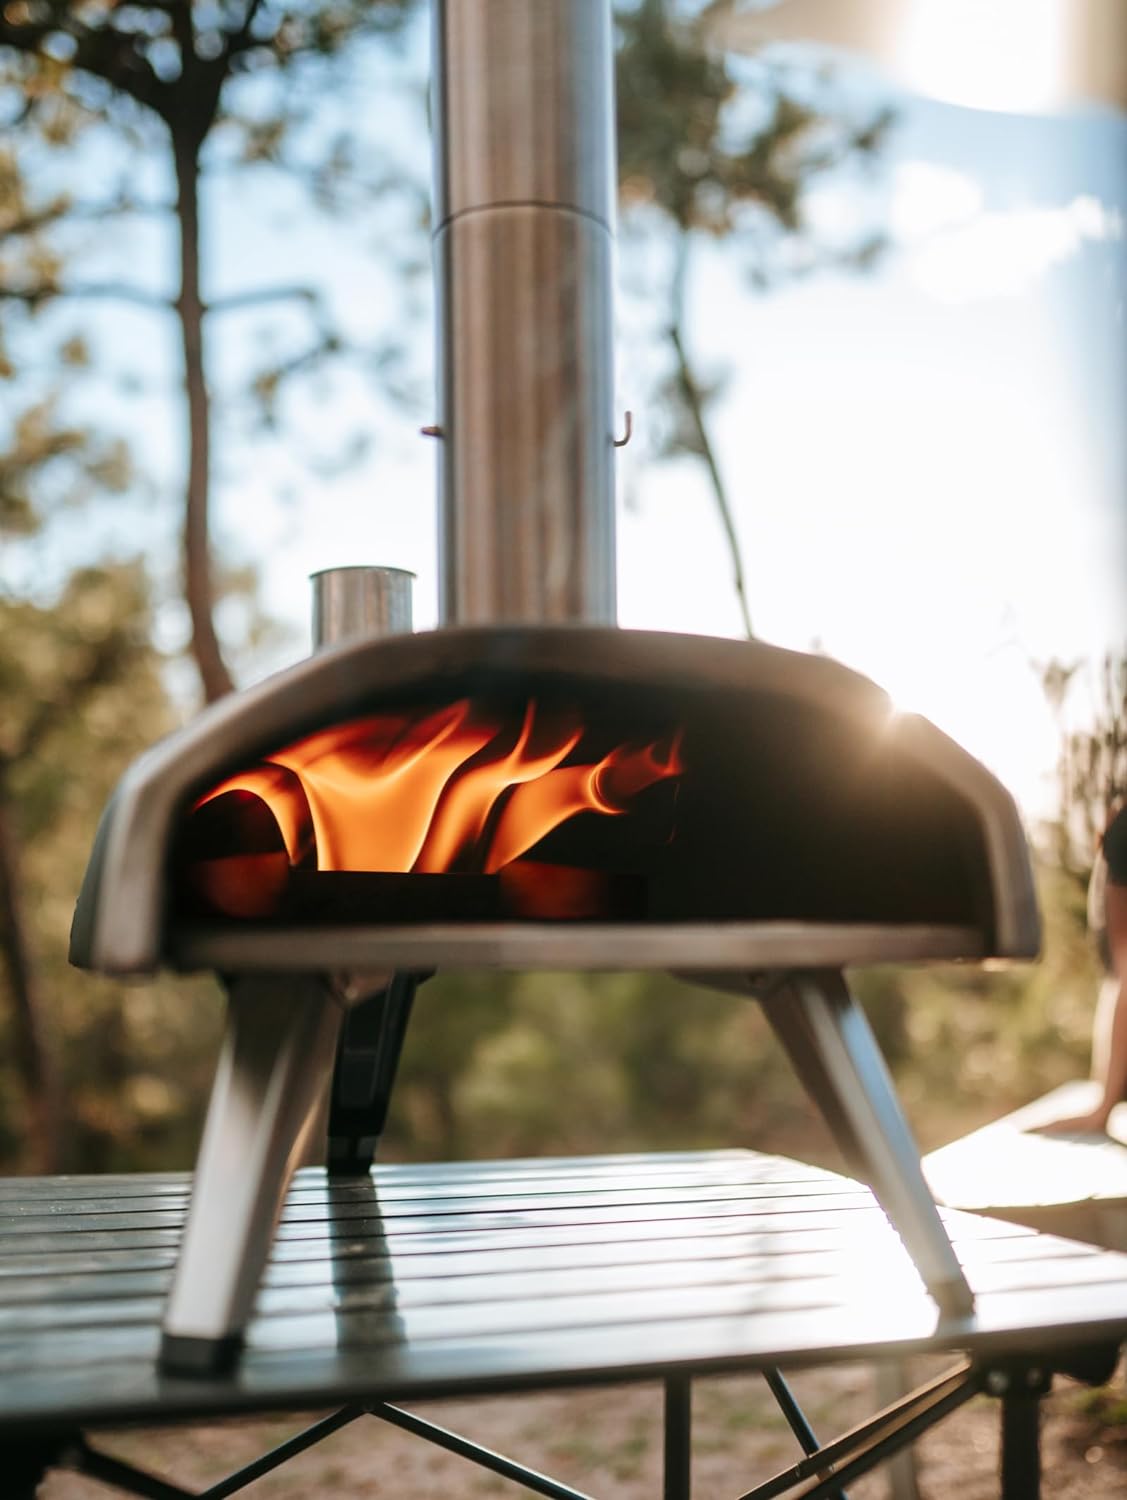 https://bigbigmart.com/wp-content/uploads/2023/10/ooni-Fyra-12-Wood-Fired-Outdoor-Pizza-Oven-Portable-Hard-Wood-Pellet-Pizza-Oven-Ideal-for-Any-Outdoor-Kitchen-Outdoor-Cooking-Pizza-Maker-Backyard-Pizza-Ovens-Countertop-Pizza-Oven8.jpg